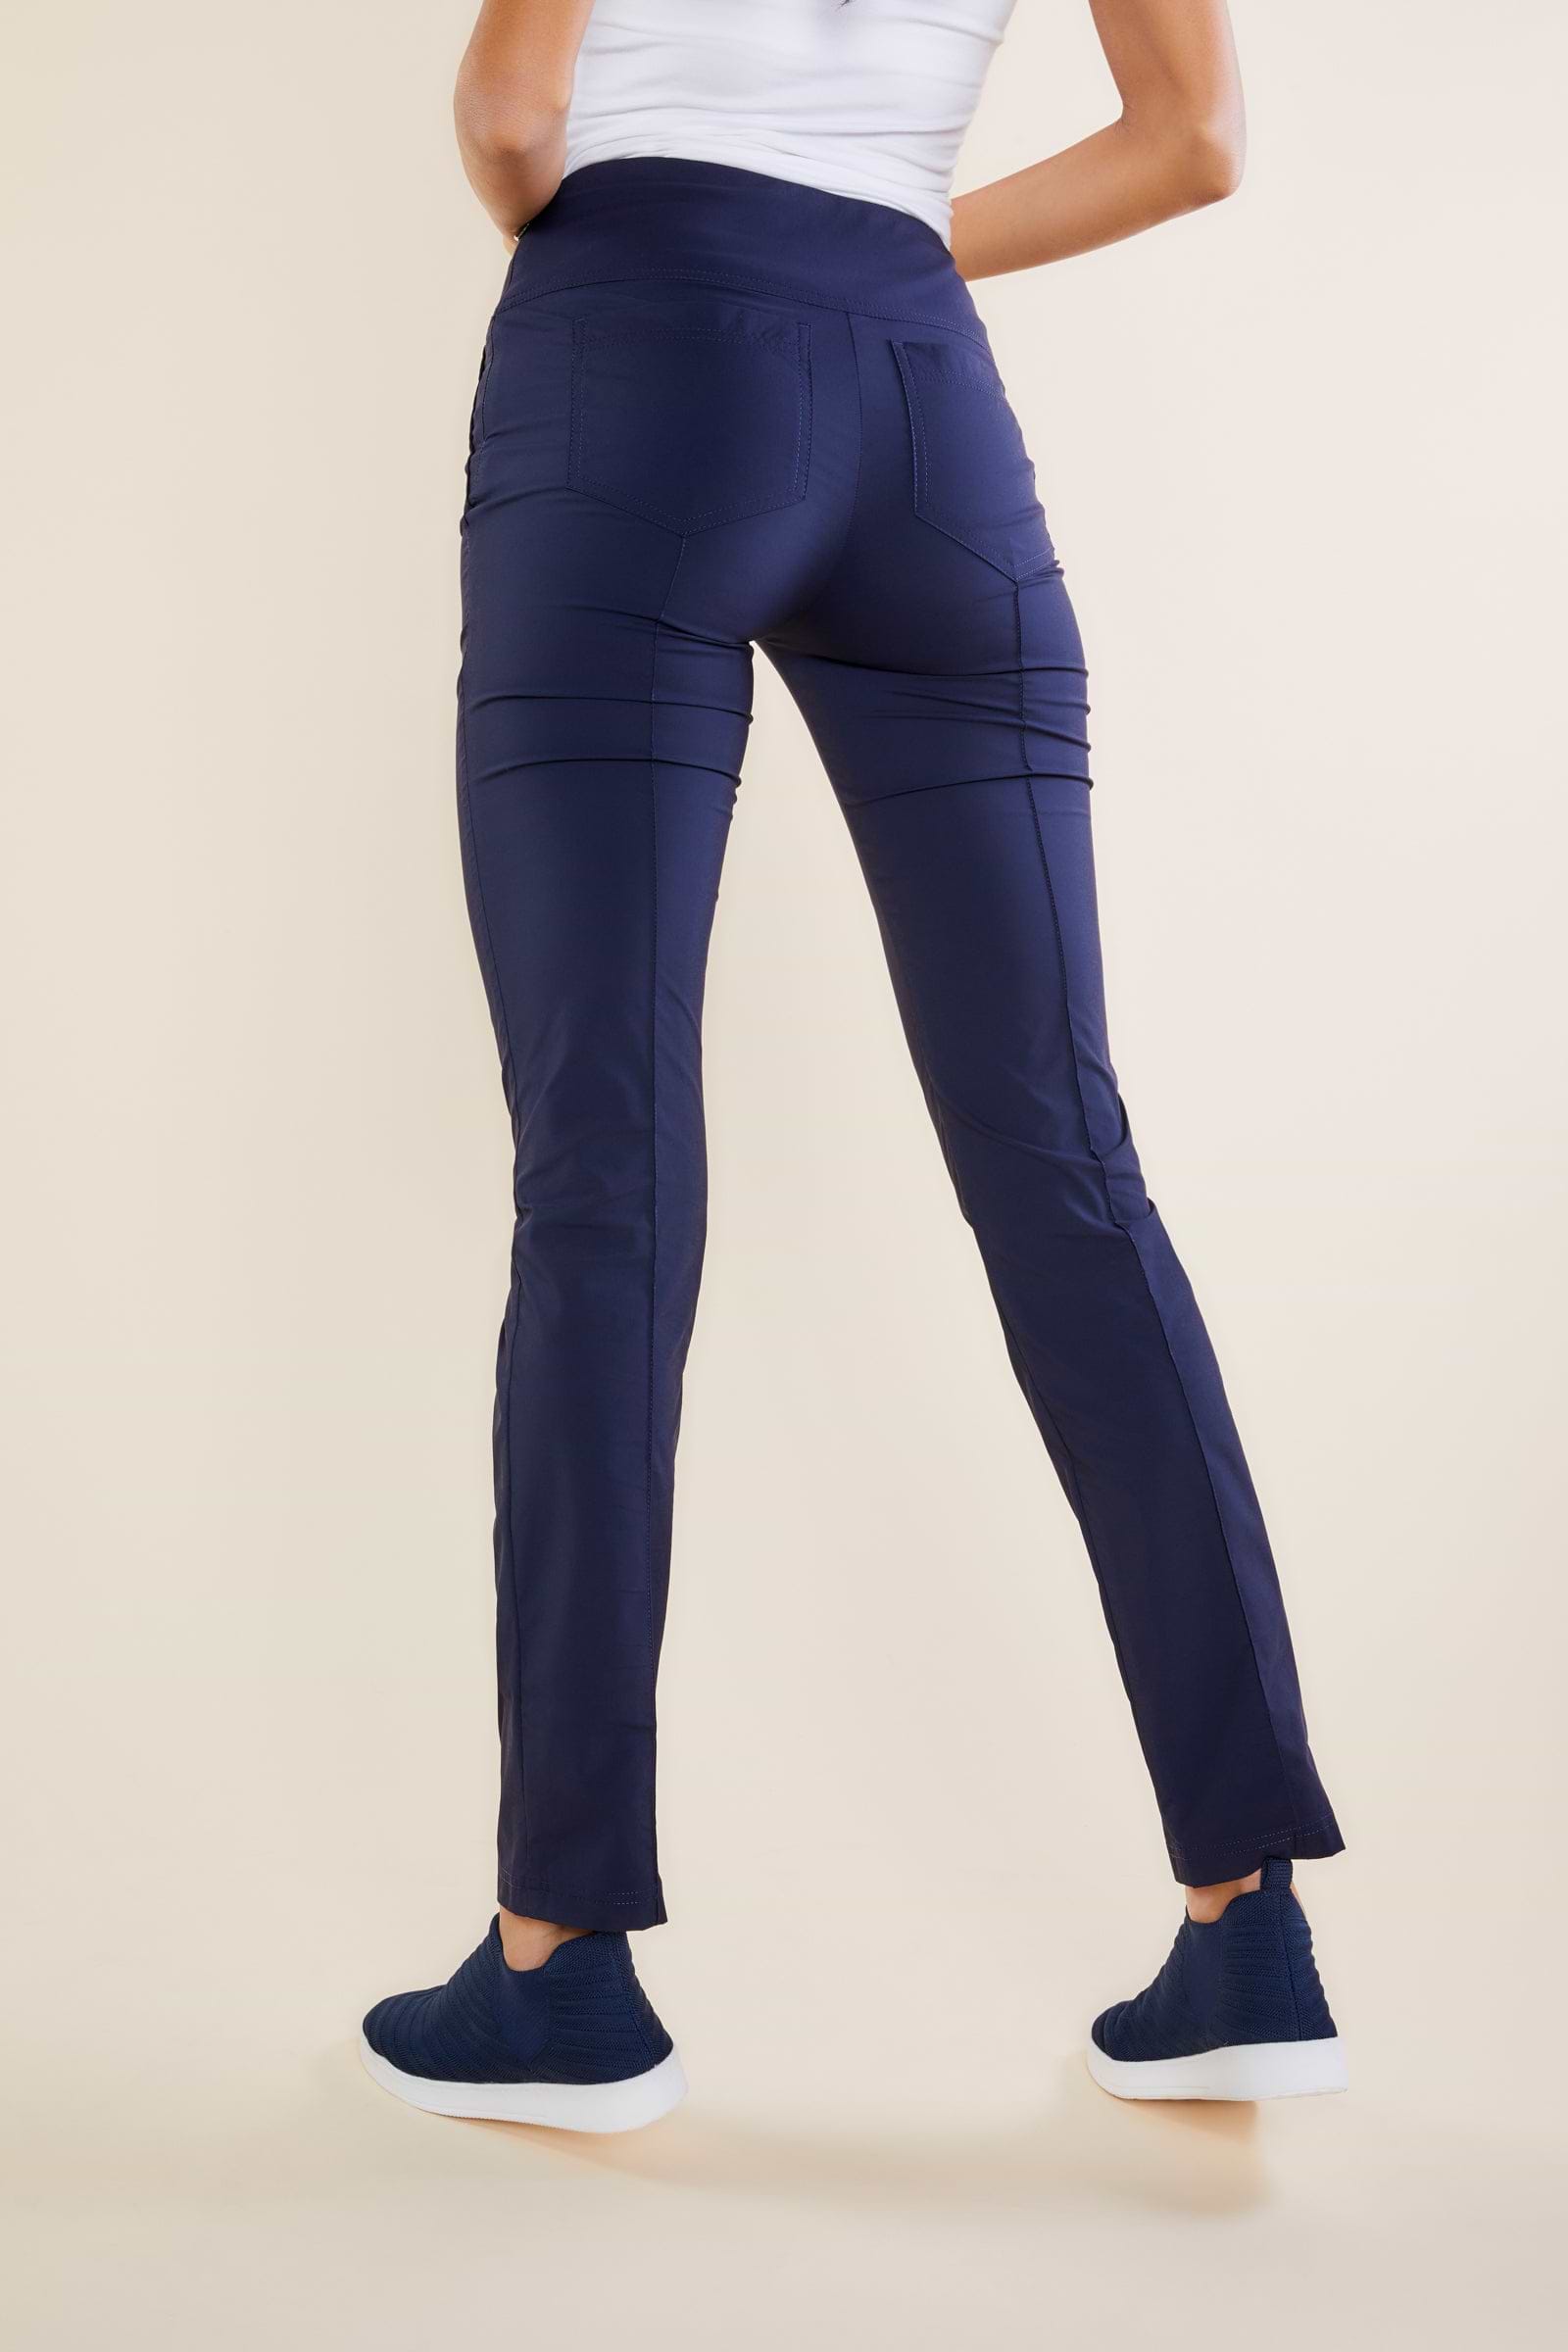 The Best Travel Pants. Back Profile of the Sonia Curvy High Rise Pant in Navy